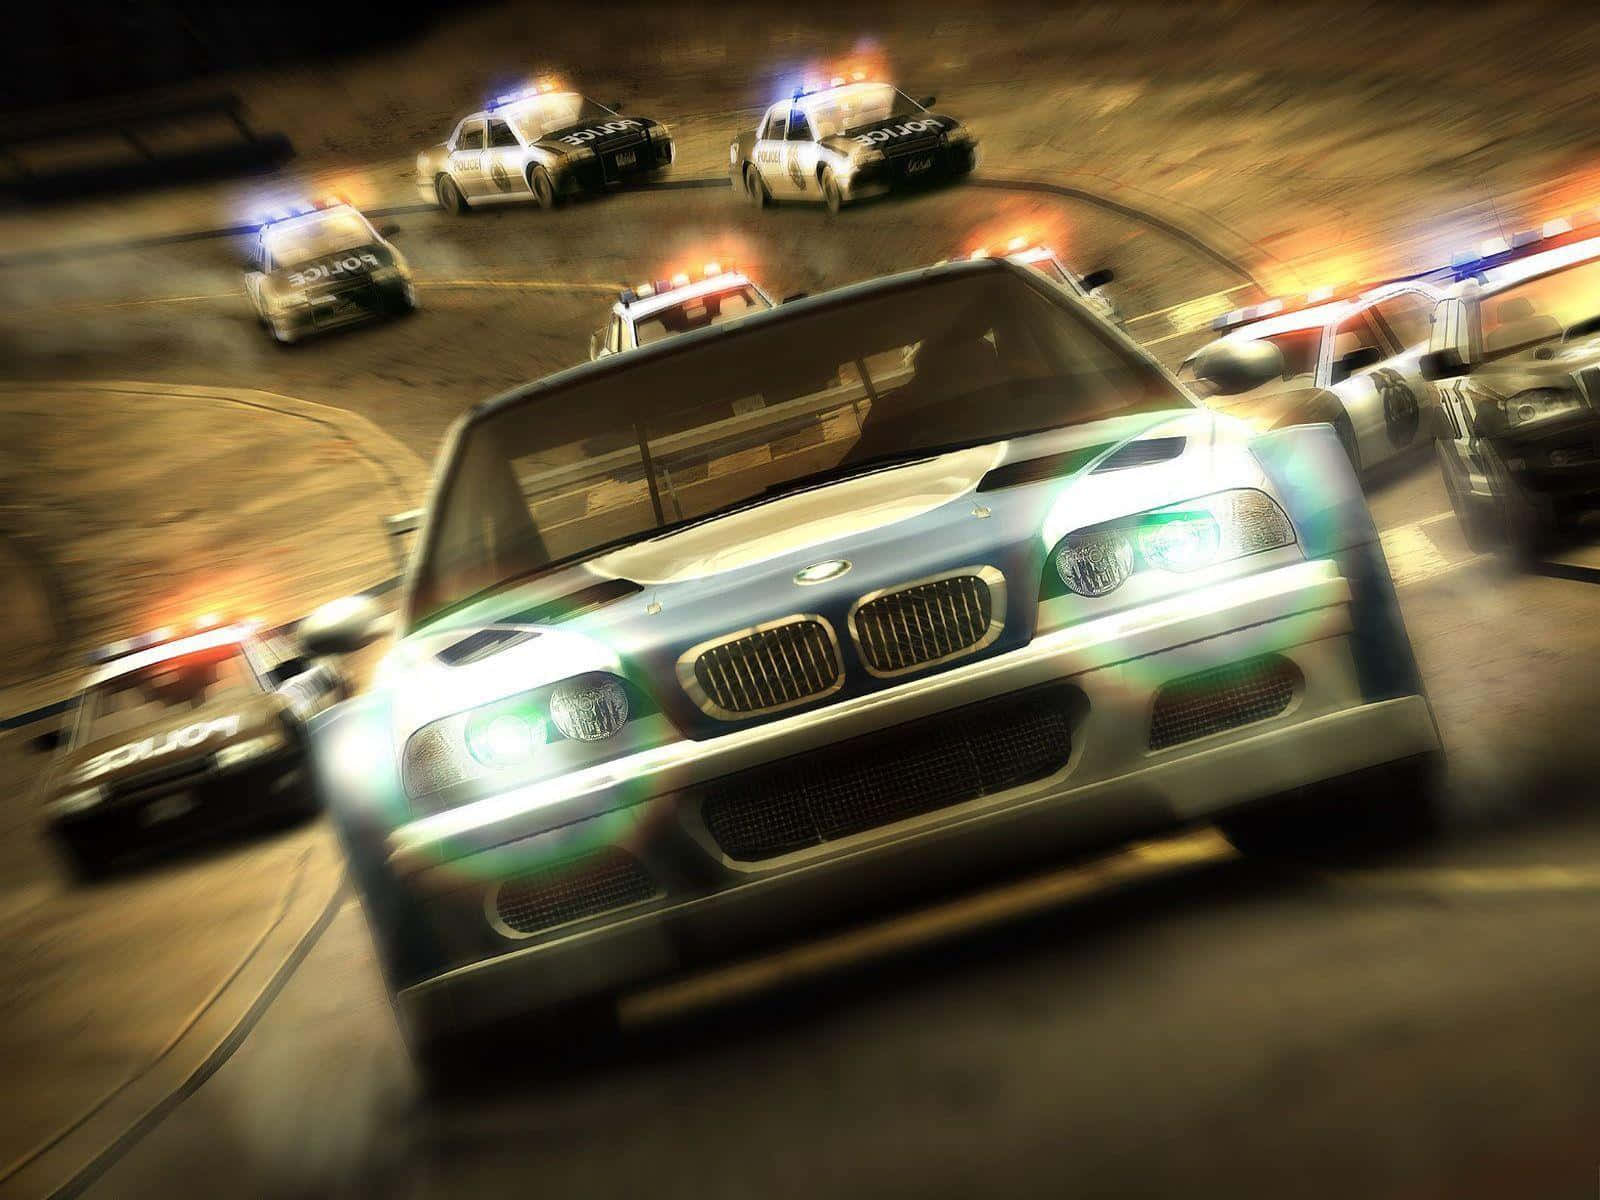 A Drama-filled Night Race in Need For Speed Wallpaper